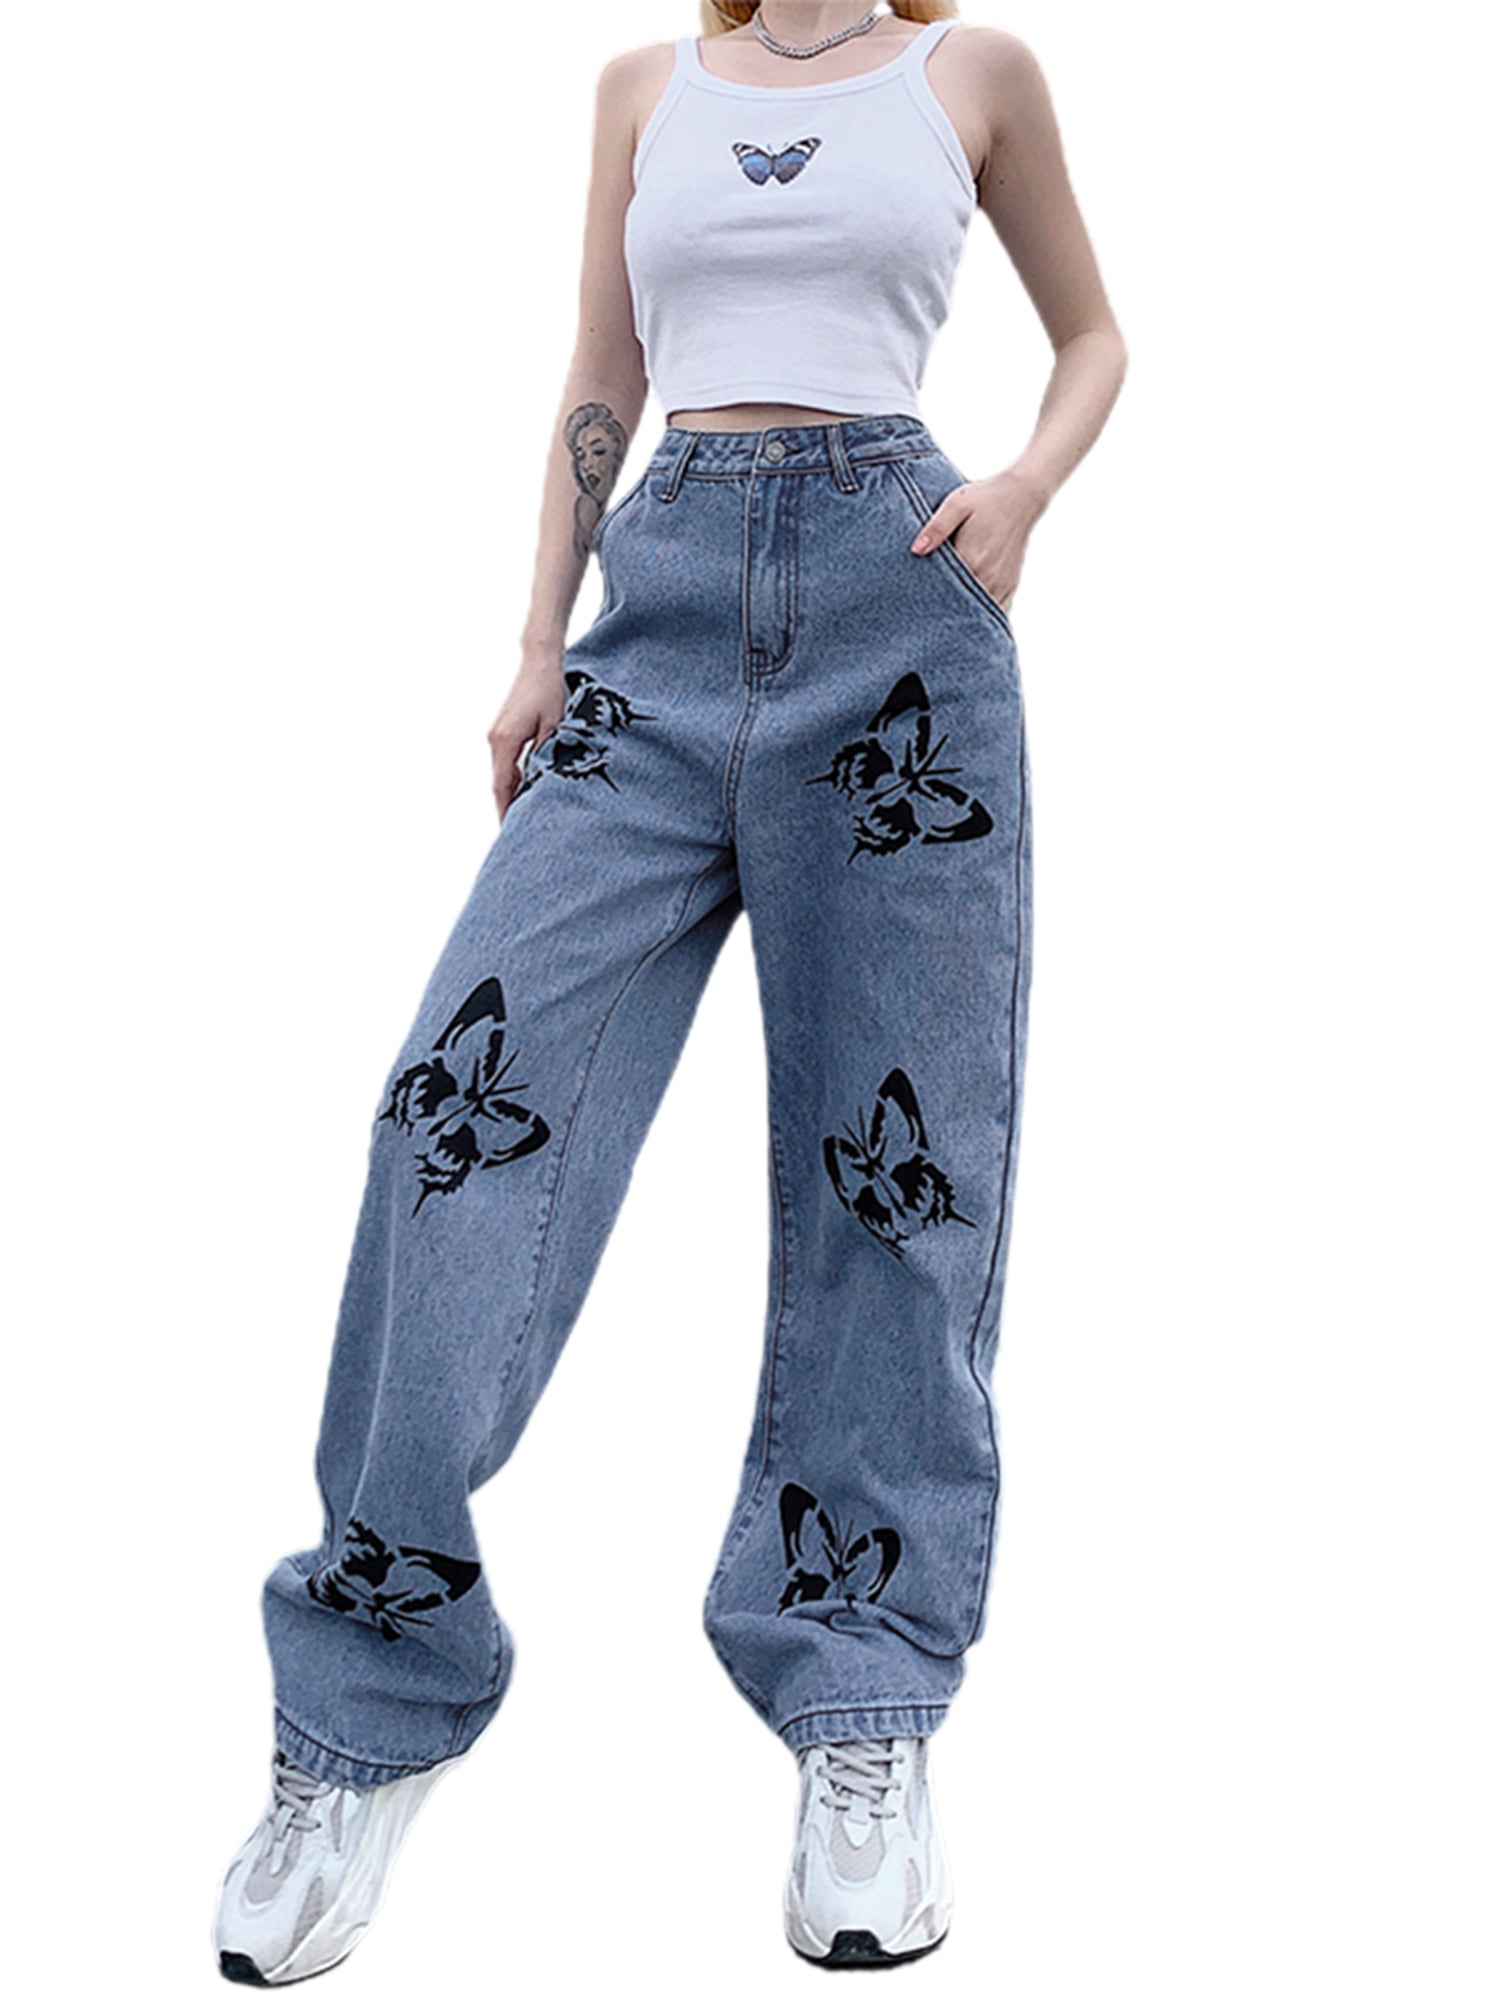 Pudcoco Women Loose Jeans High Waist Long Straight Pants Baggy Trousers